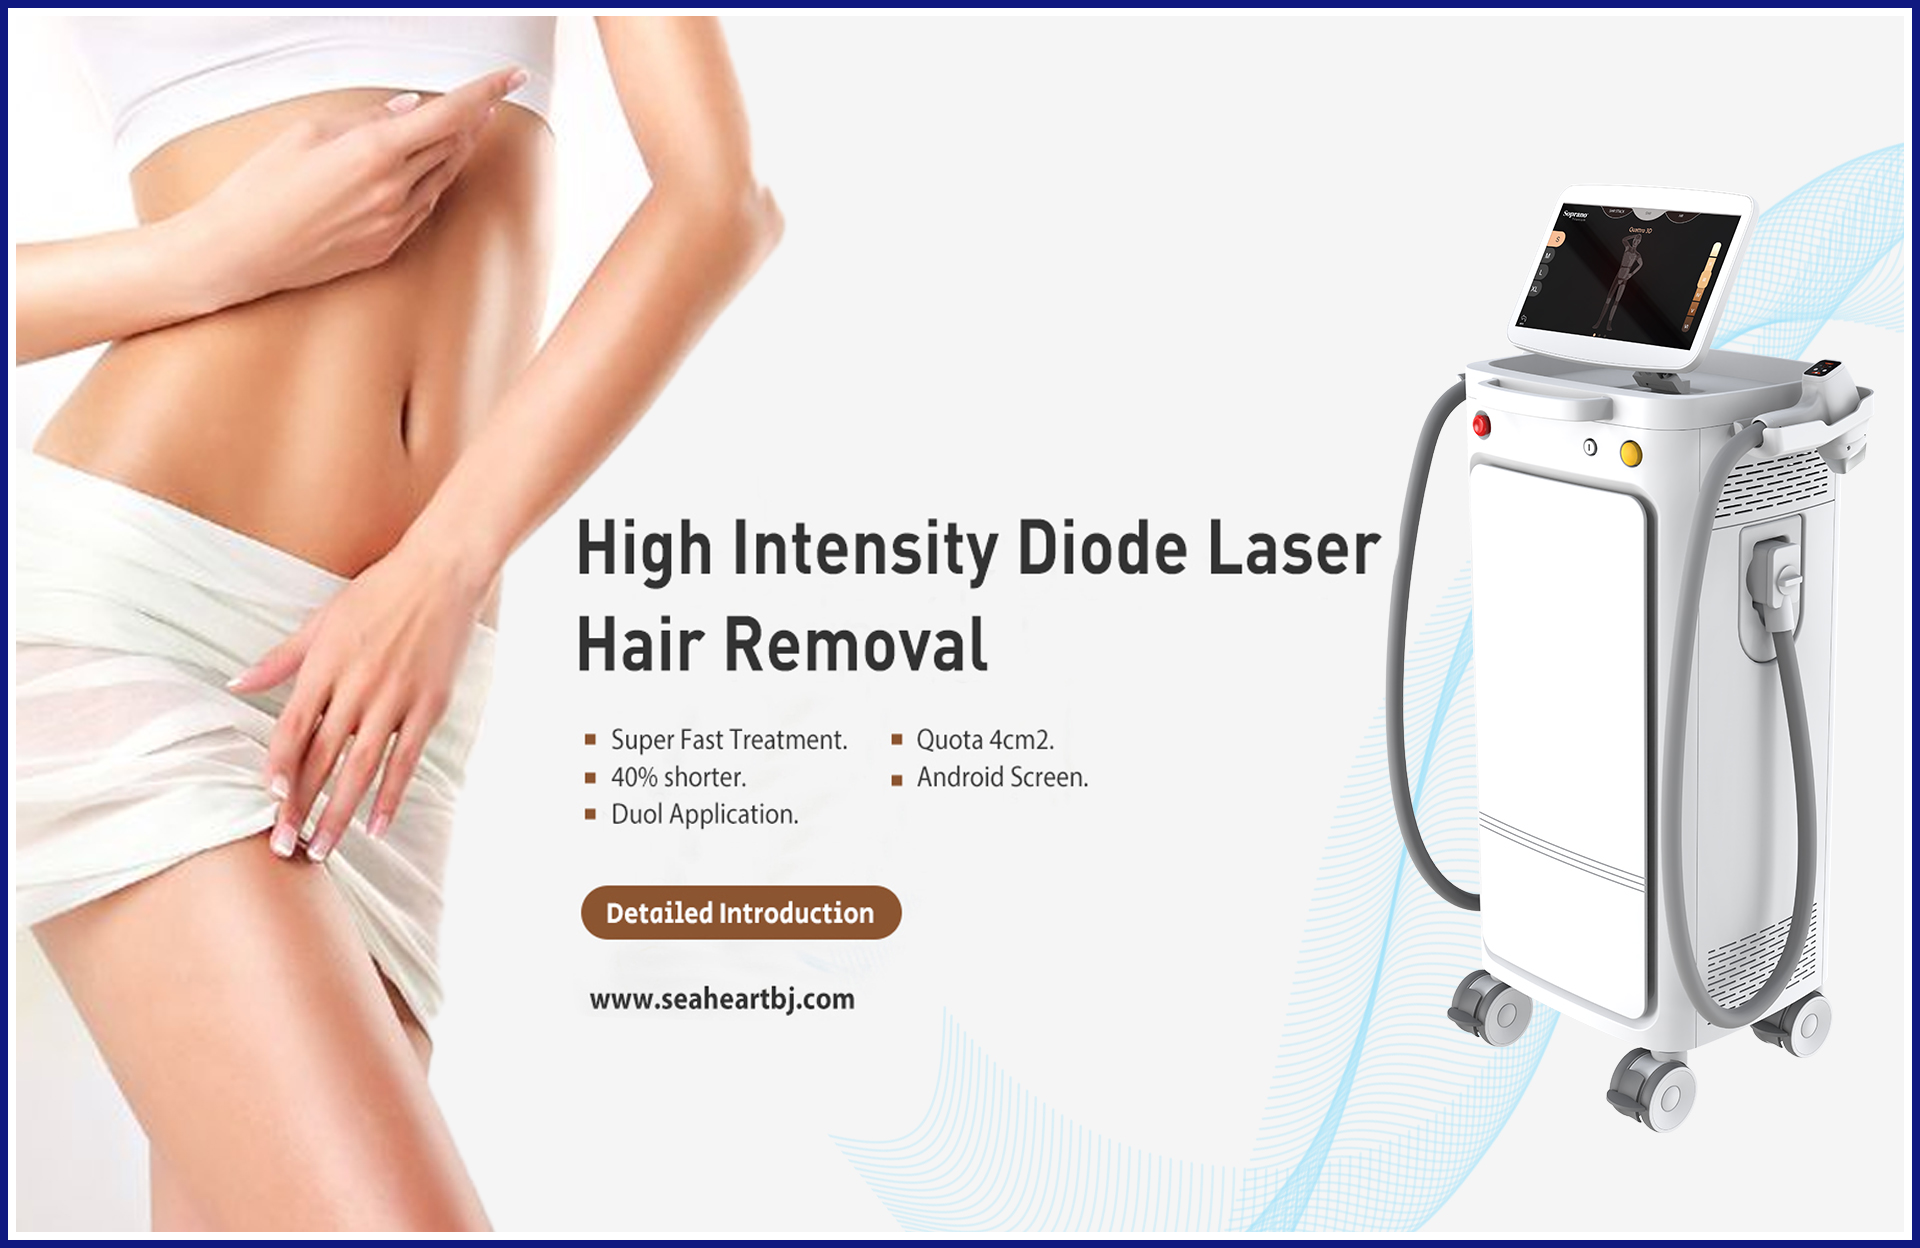 Laser Hair Removal FAQs: All You Need to Know About Treatment and Results